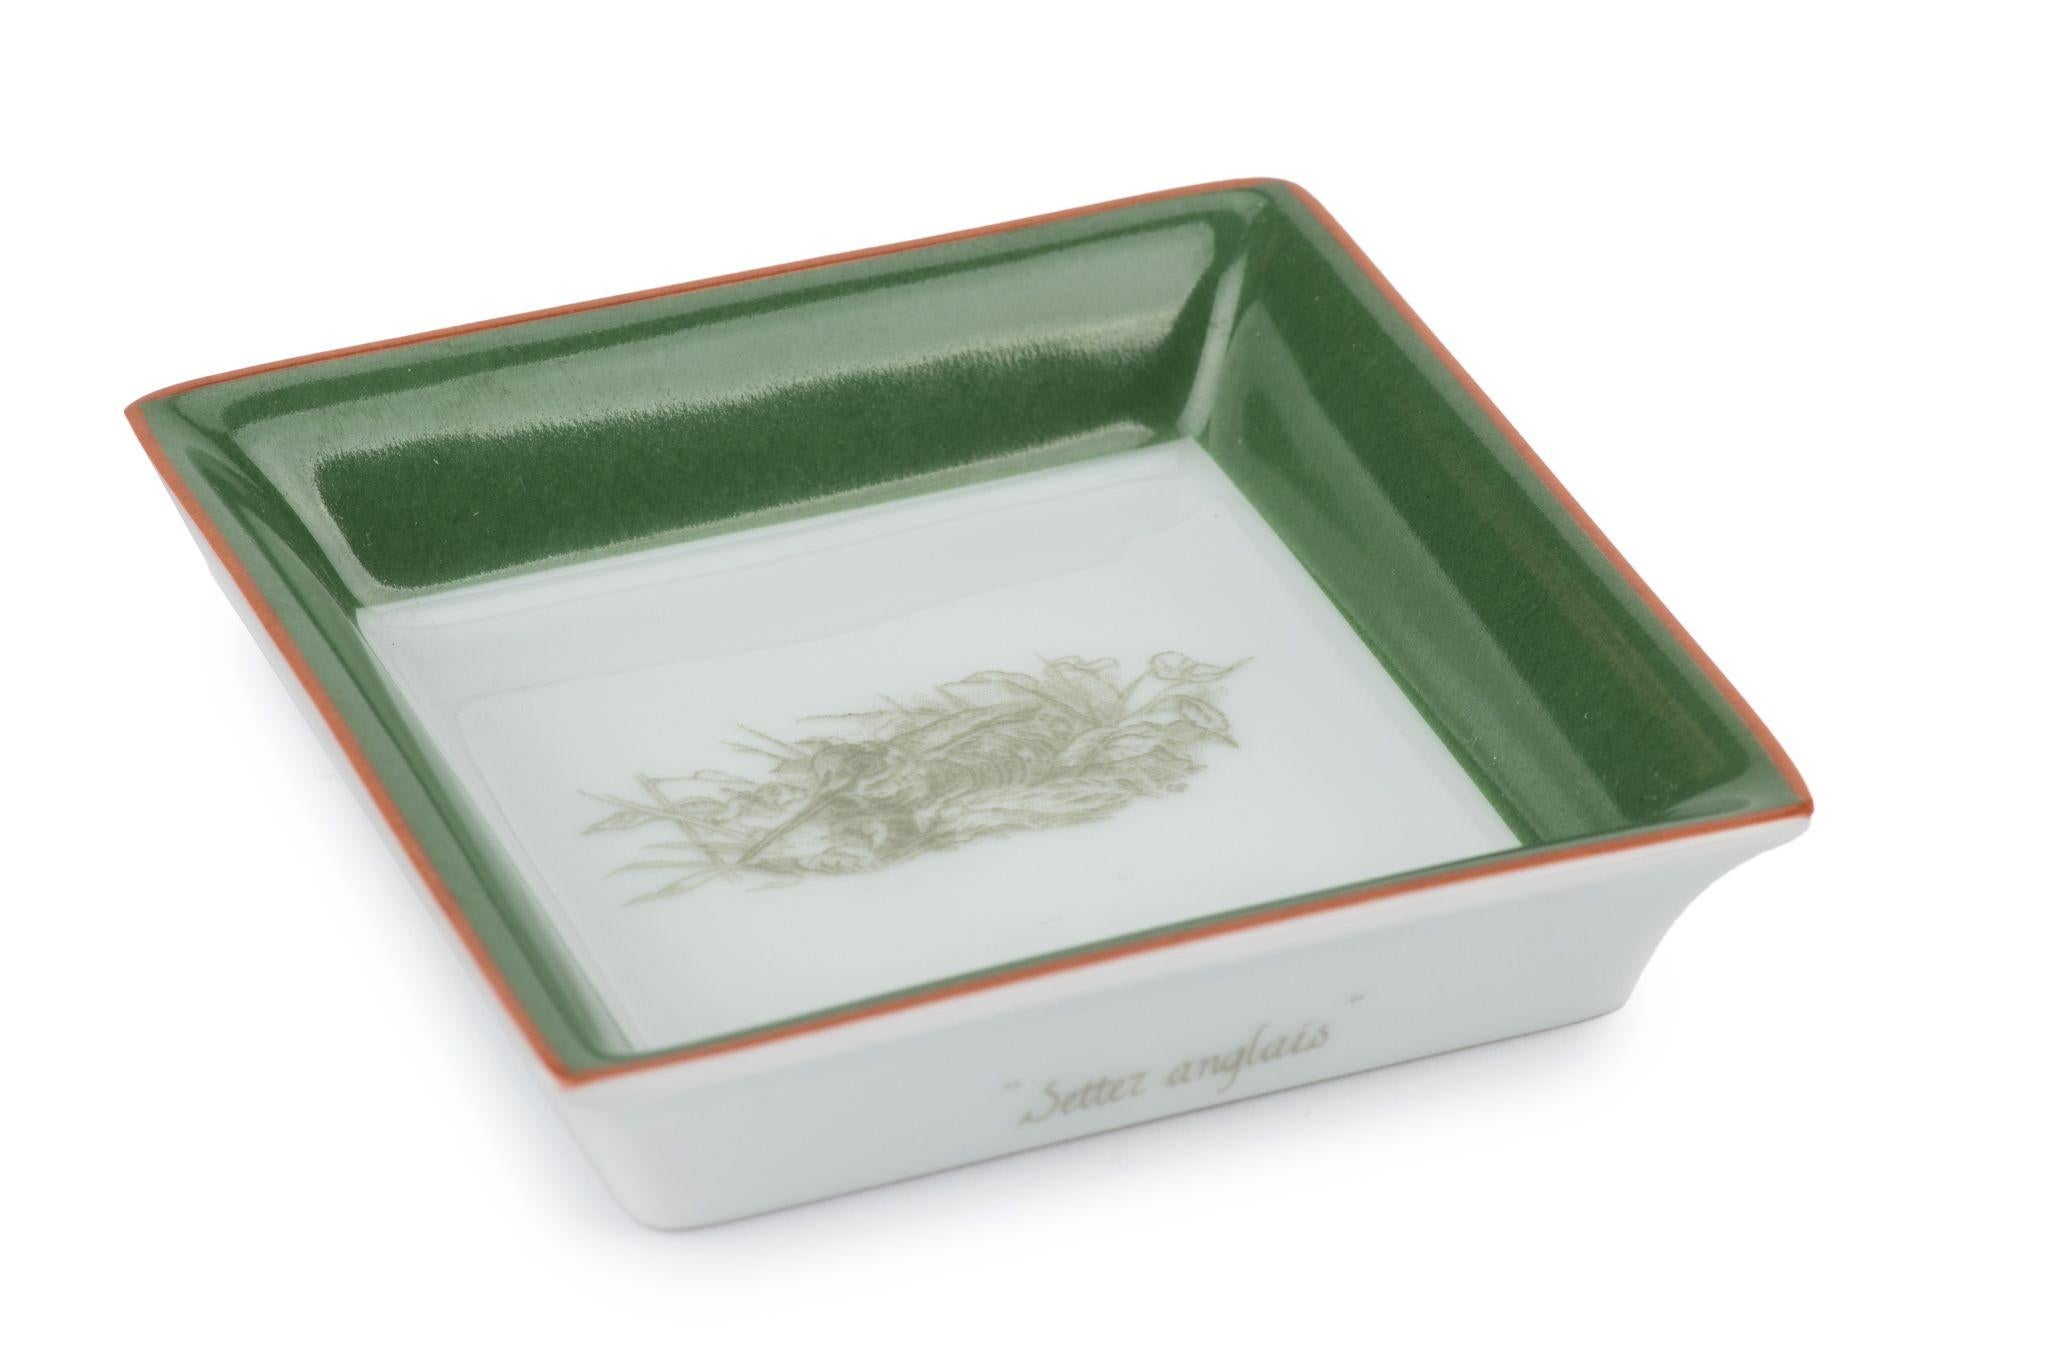 Hermès Pair Of Setter Mini Ashtrays Box In Excellent Condition For Sale In West Hollywood, CA